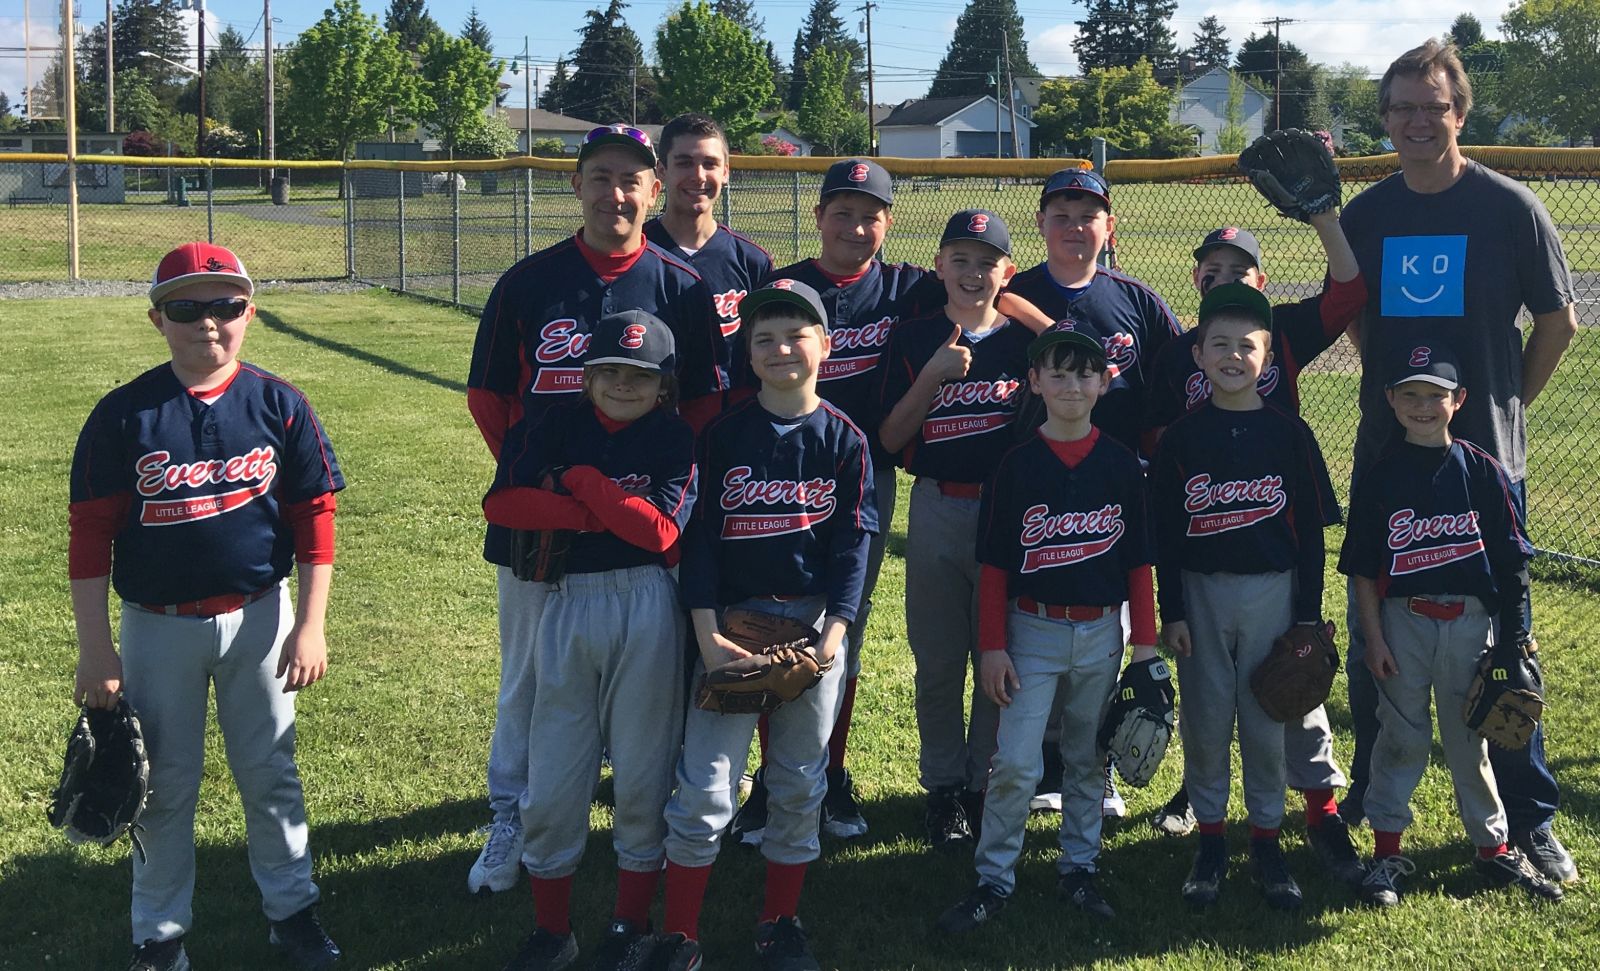 Look for us a local sports events in the community. Last spring, we sponsored the Everett Little League and had a great time cheering them on. Play ball!